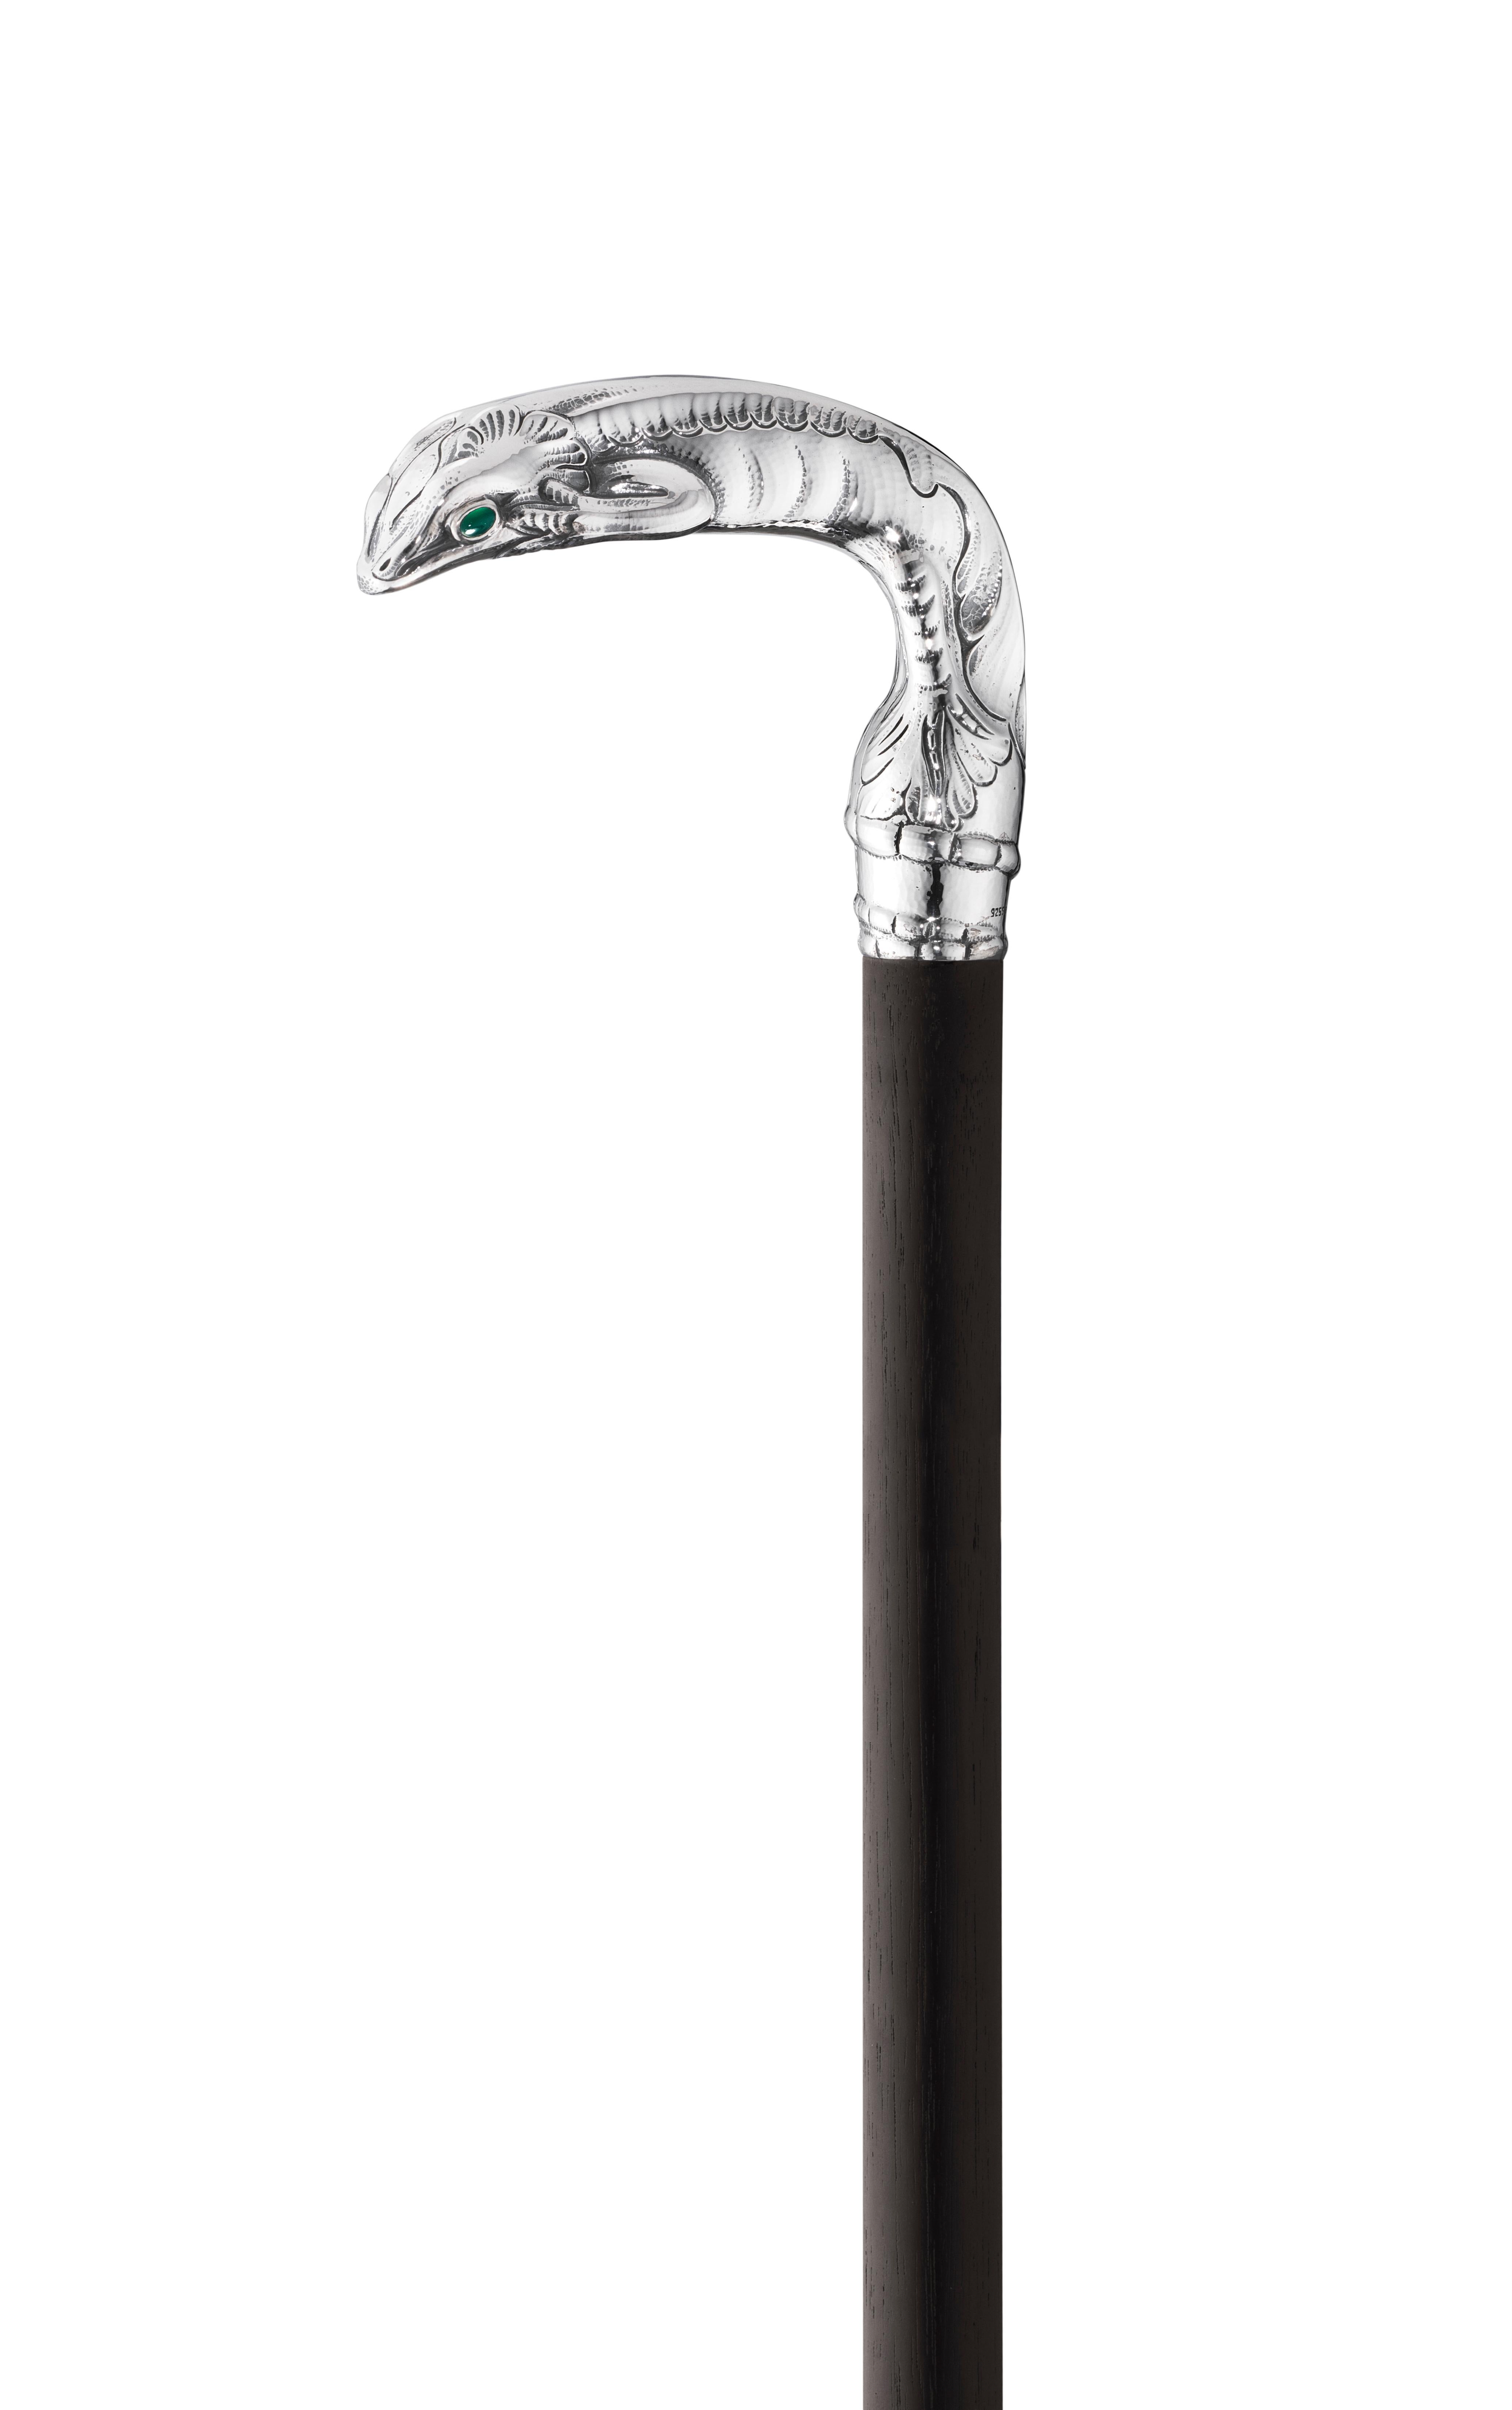 Art nouveau walking stick designed by Georg Jensen with handle shaped as a salamander with green agate eyes.
        